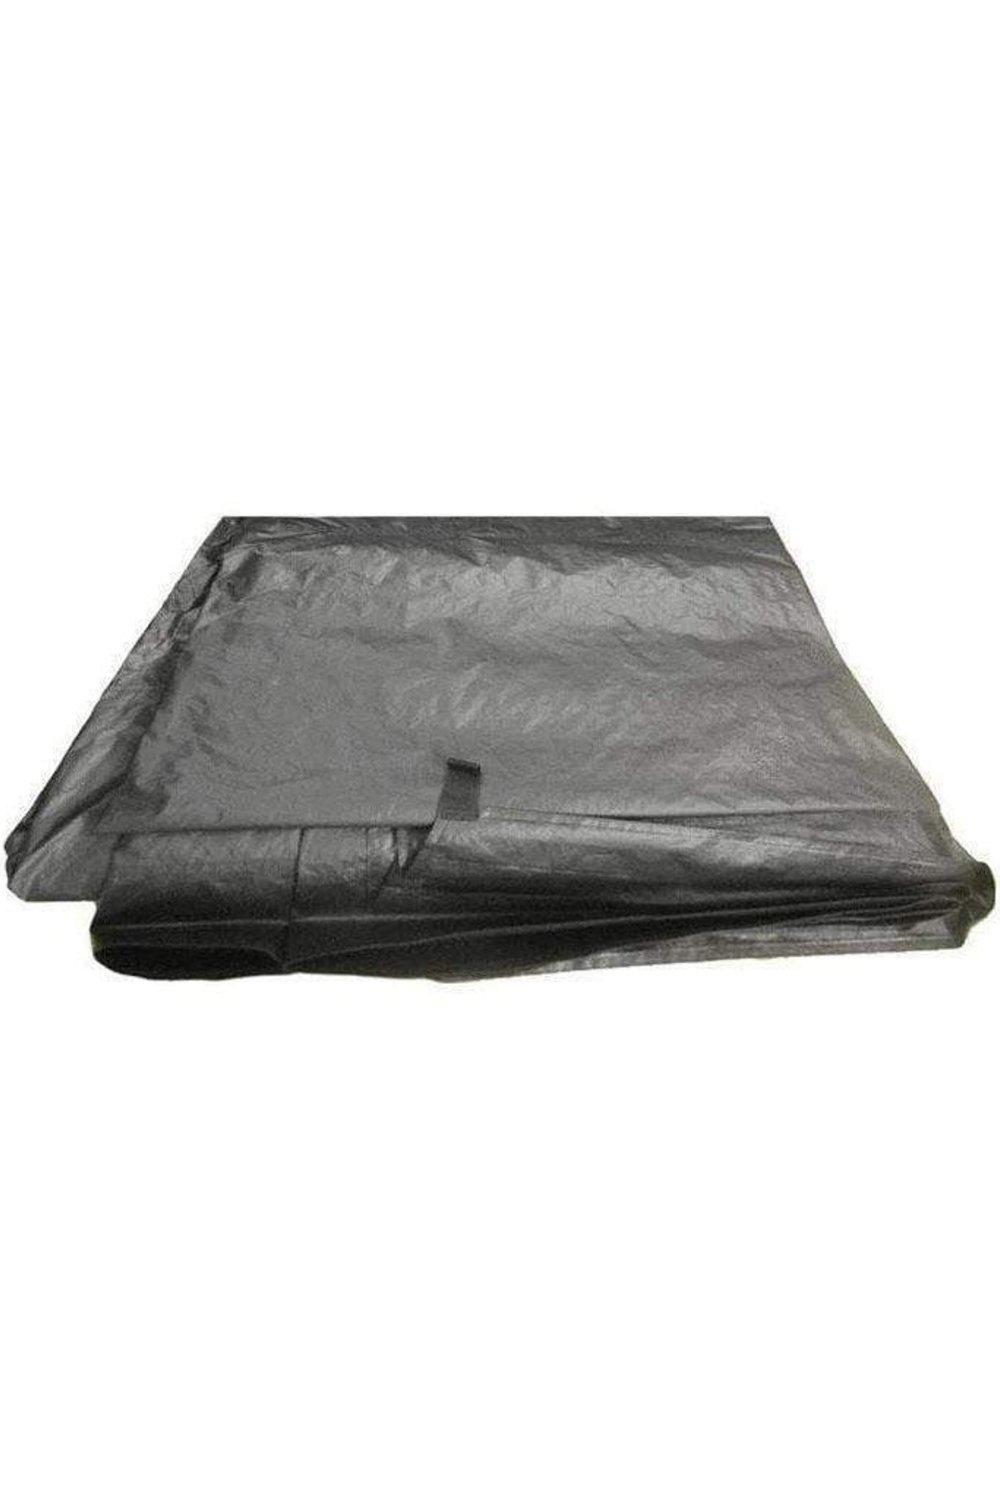 Wichenford / Breeze - Footprint Groundsheet (with Pegs)